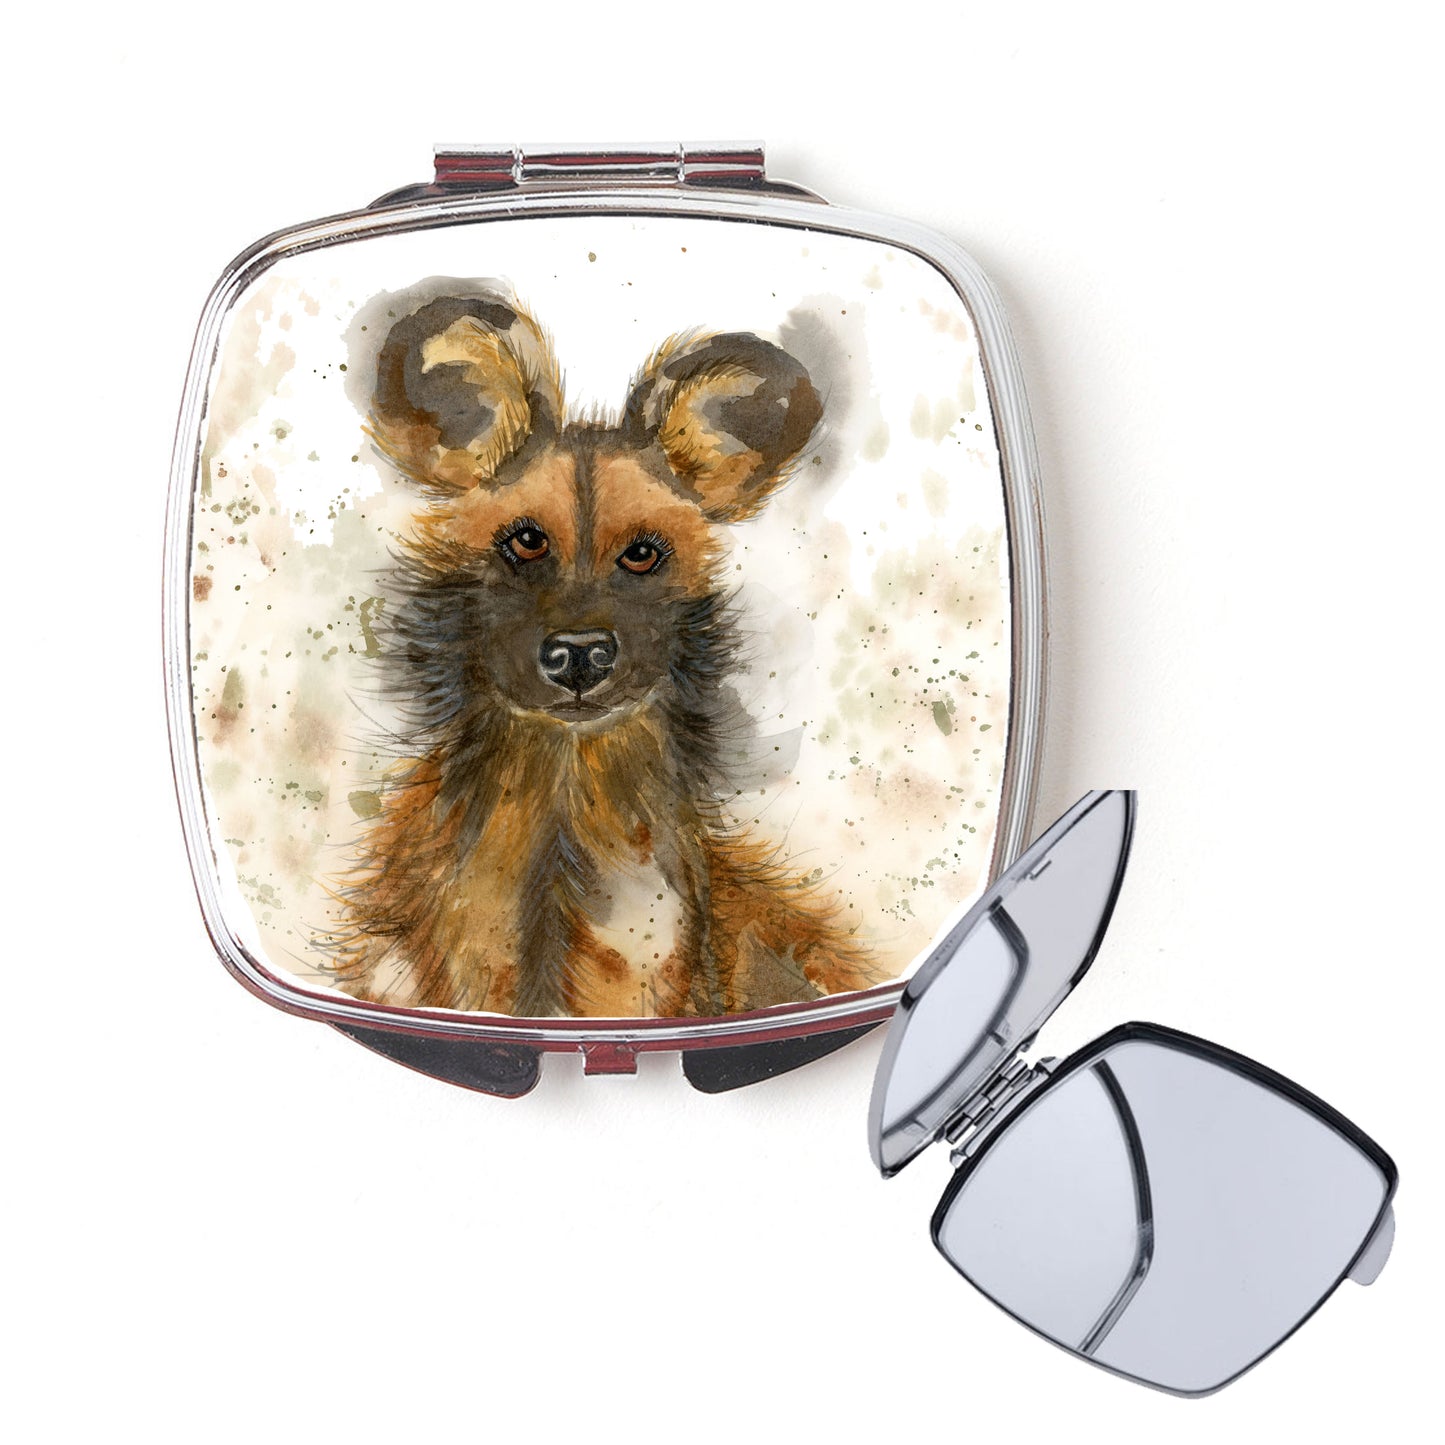 African painted dog compact mirror